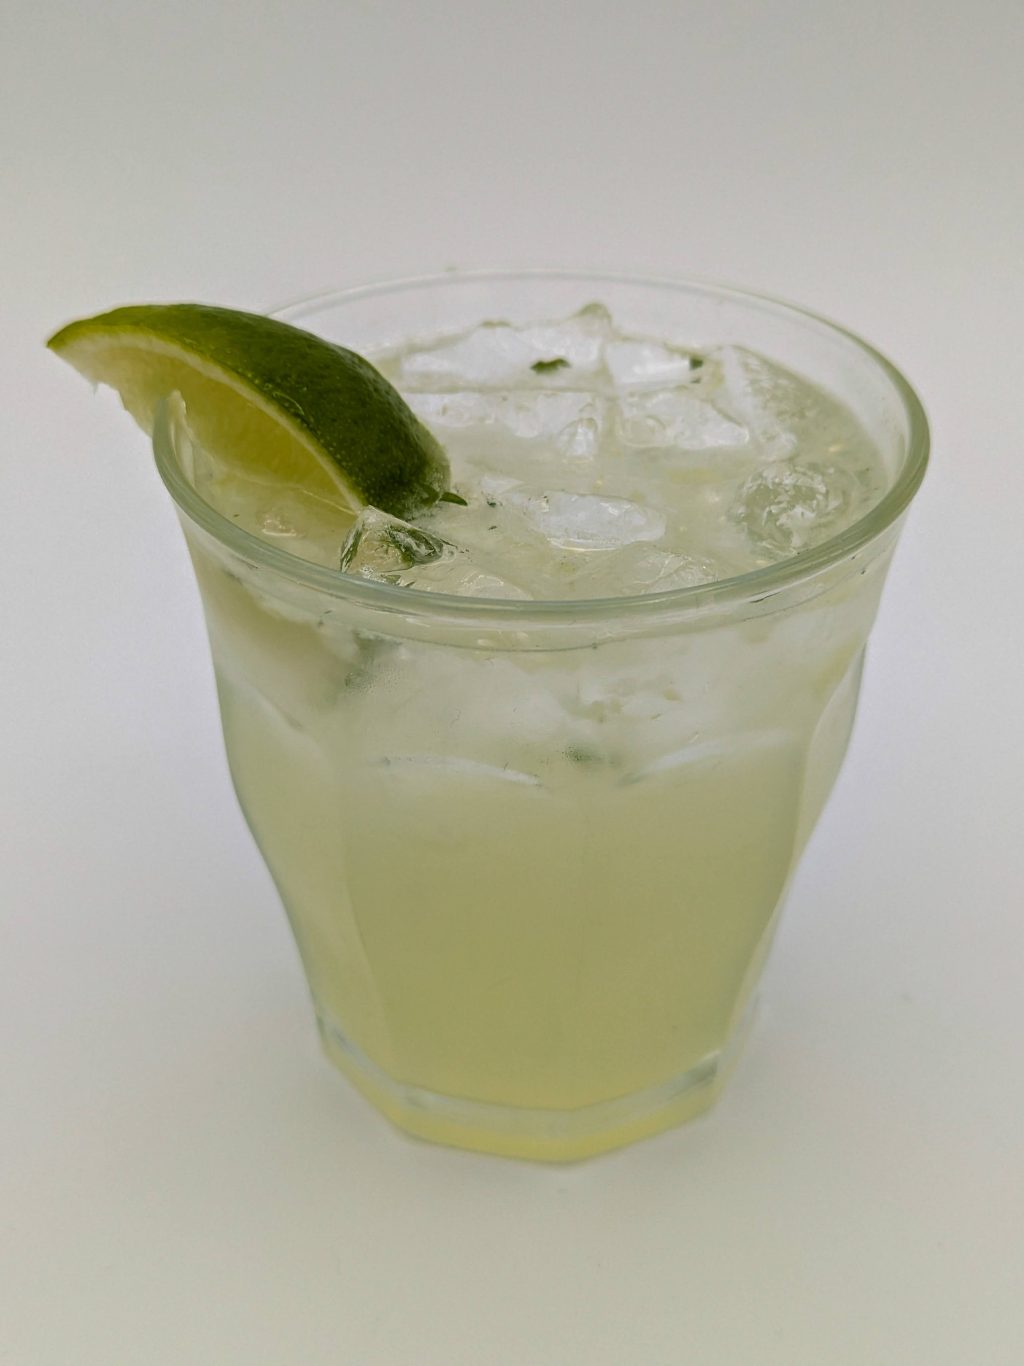 light green liquid in a glass filled with ice and garnished with a lime wedge